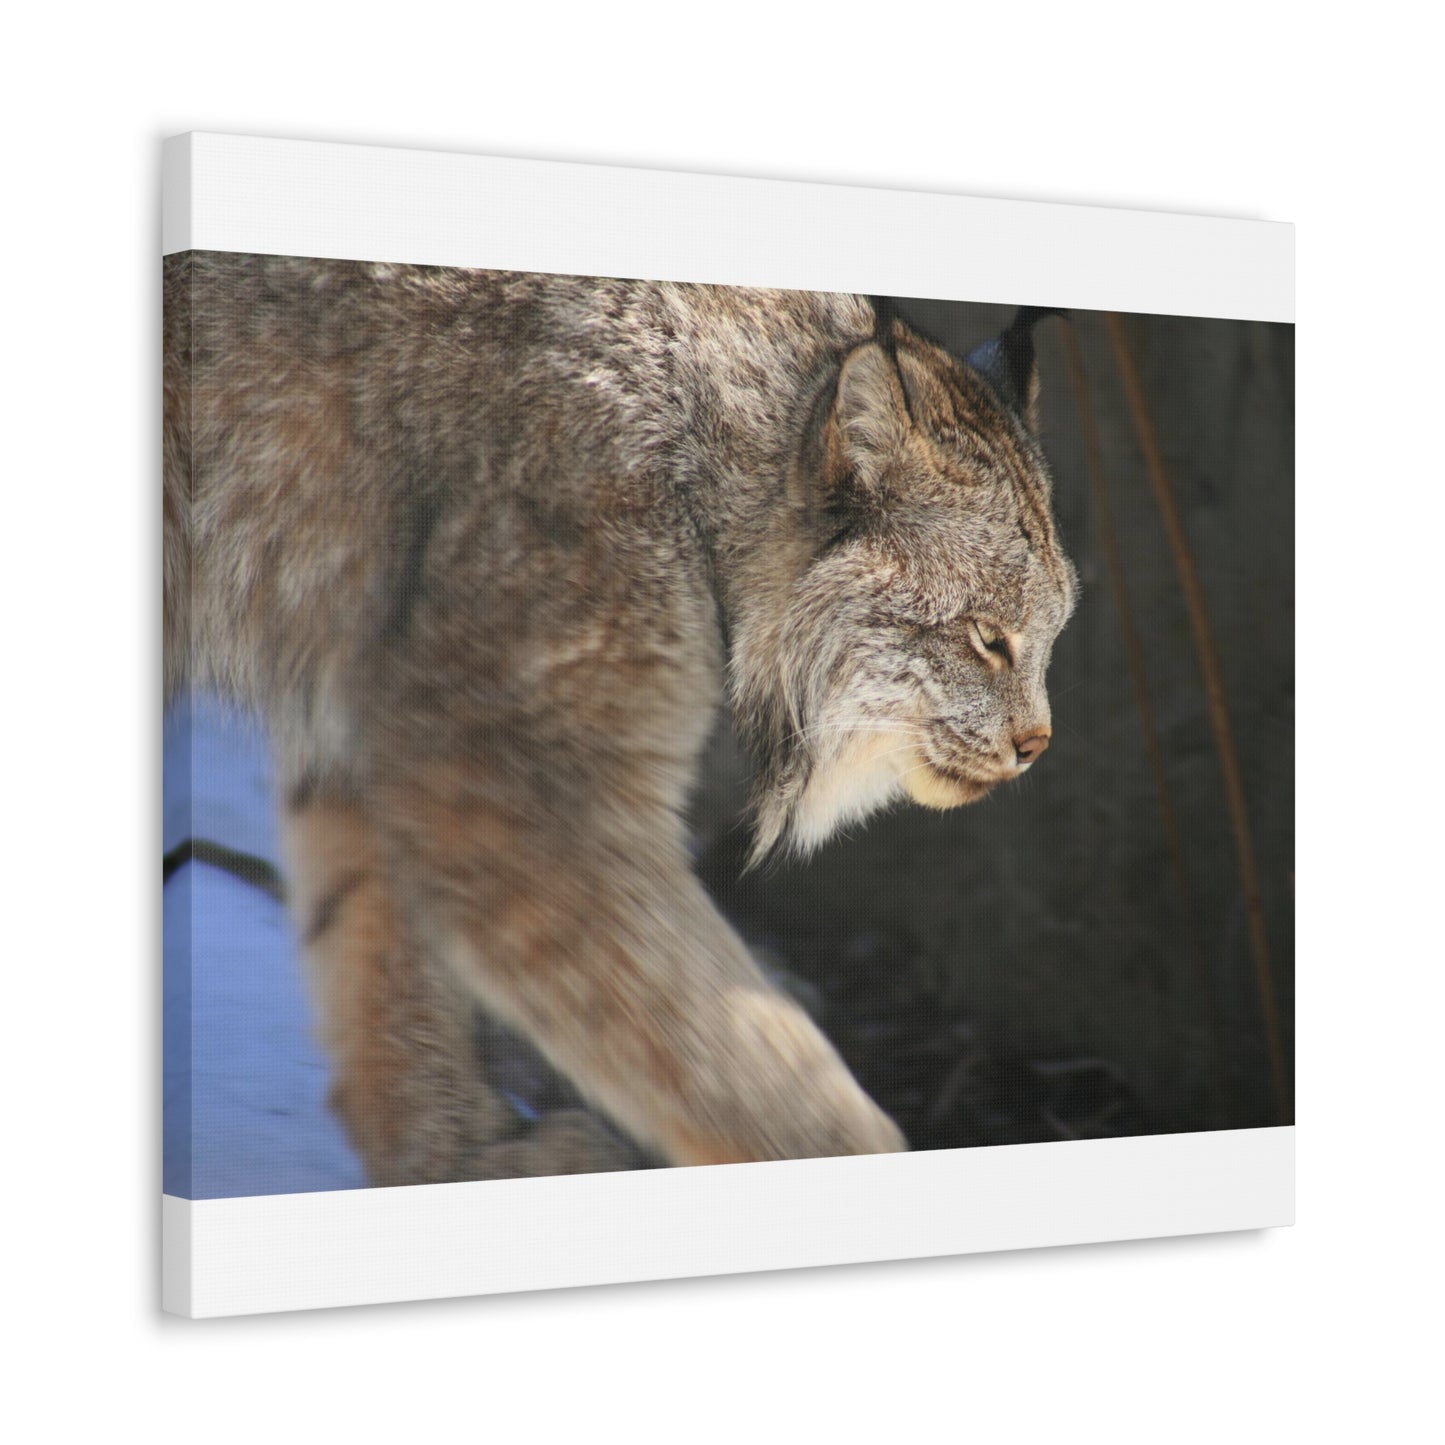 Lynx in the Wild Canvas Gallery Wraps